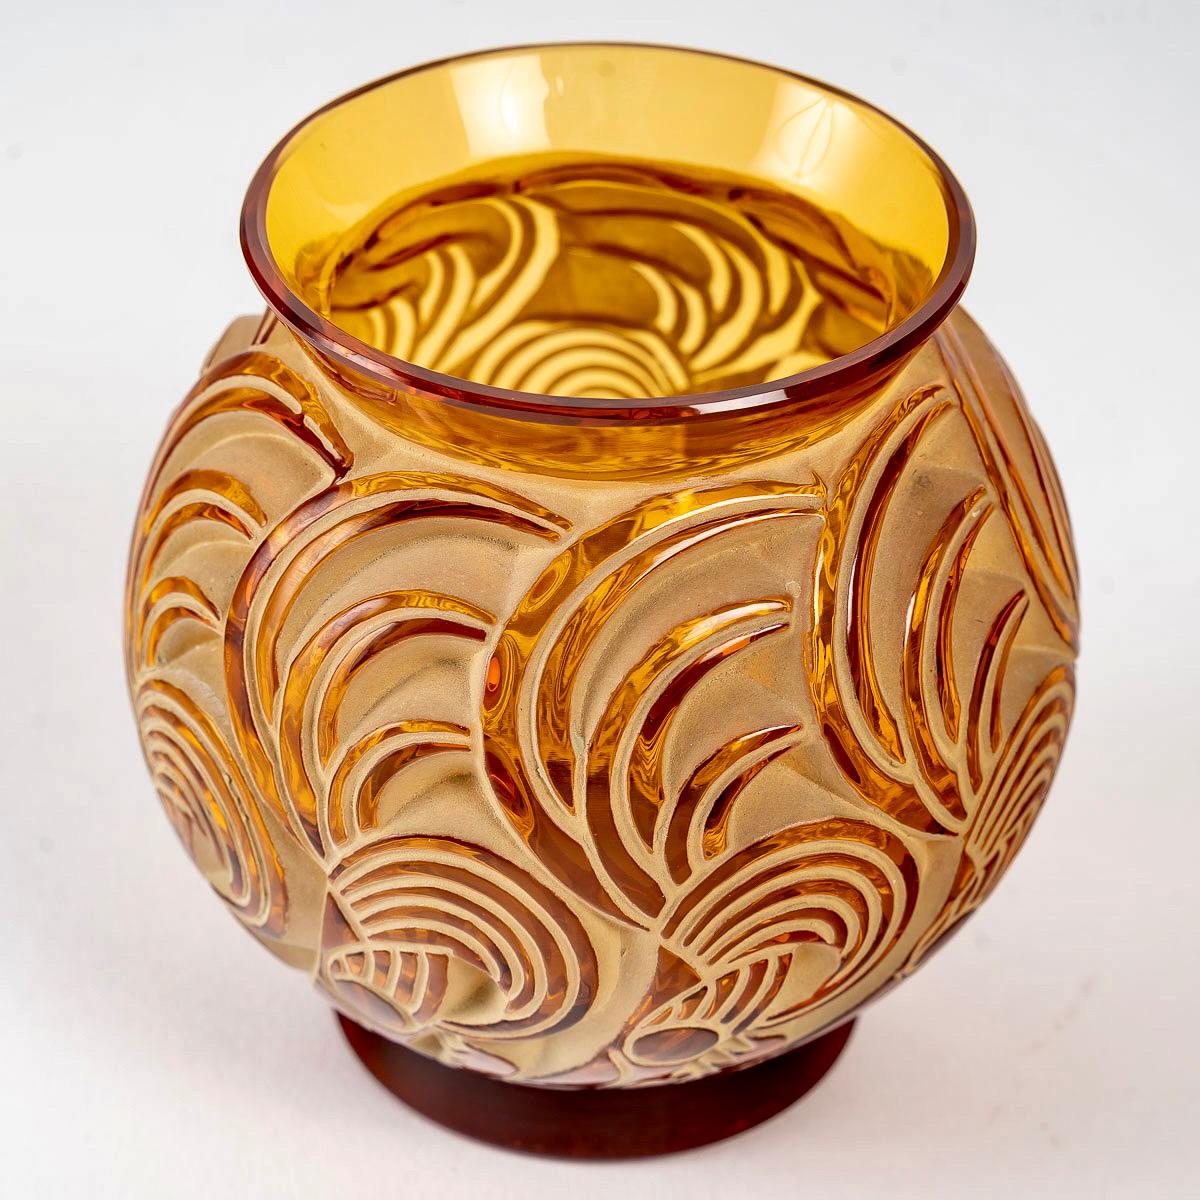 Molded 1931 René Lalique, Vase Bresse Amber Yellow Glass with Green Beige Patina